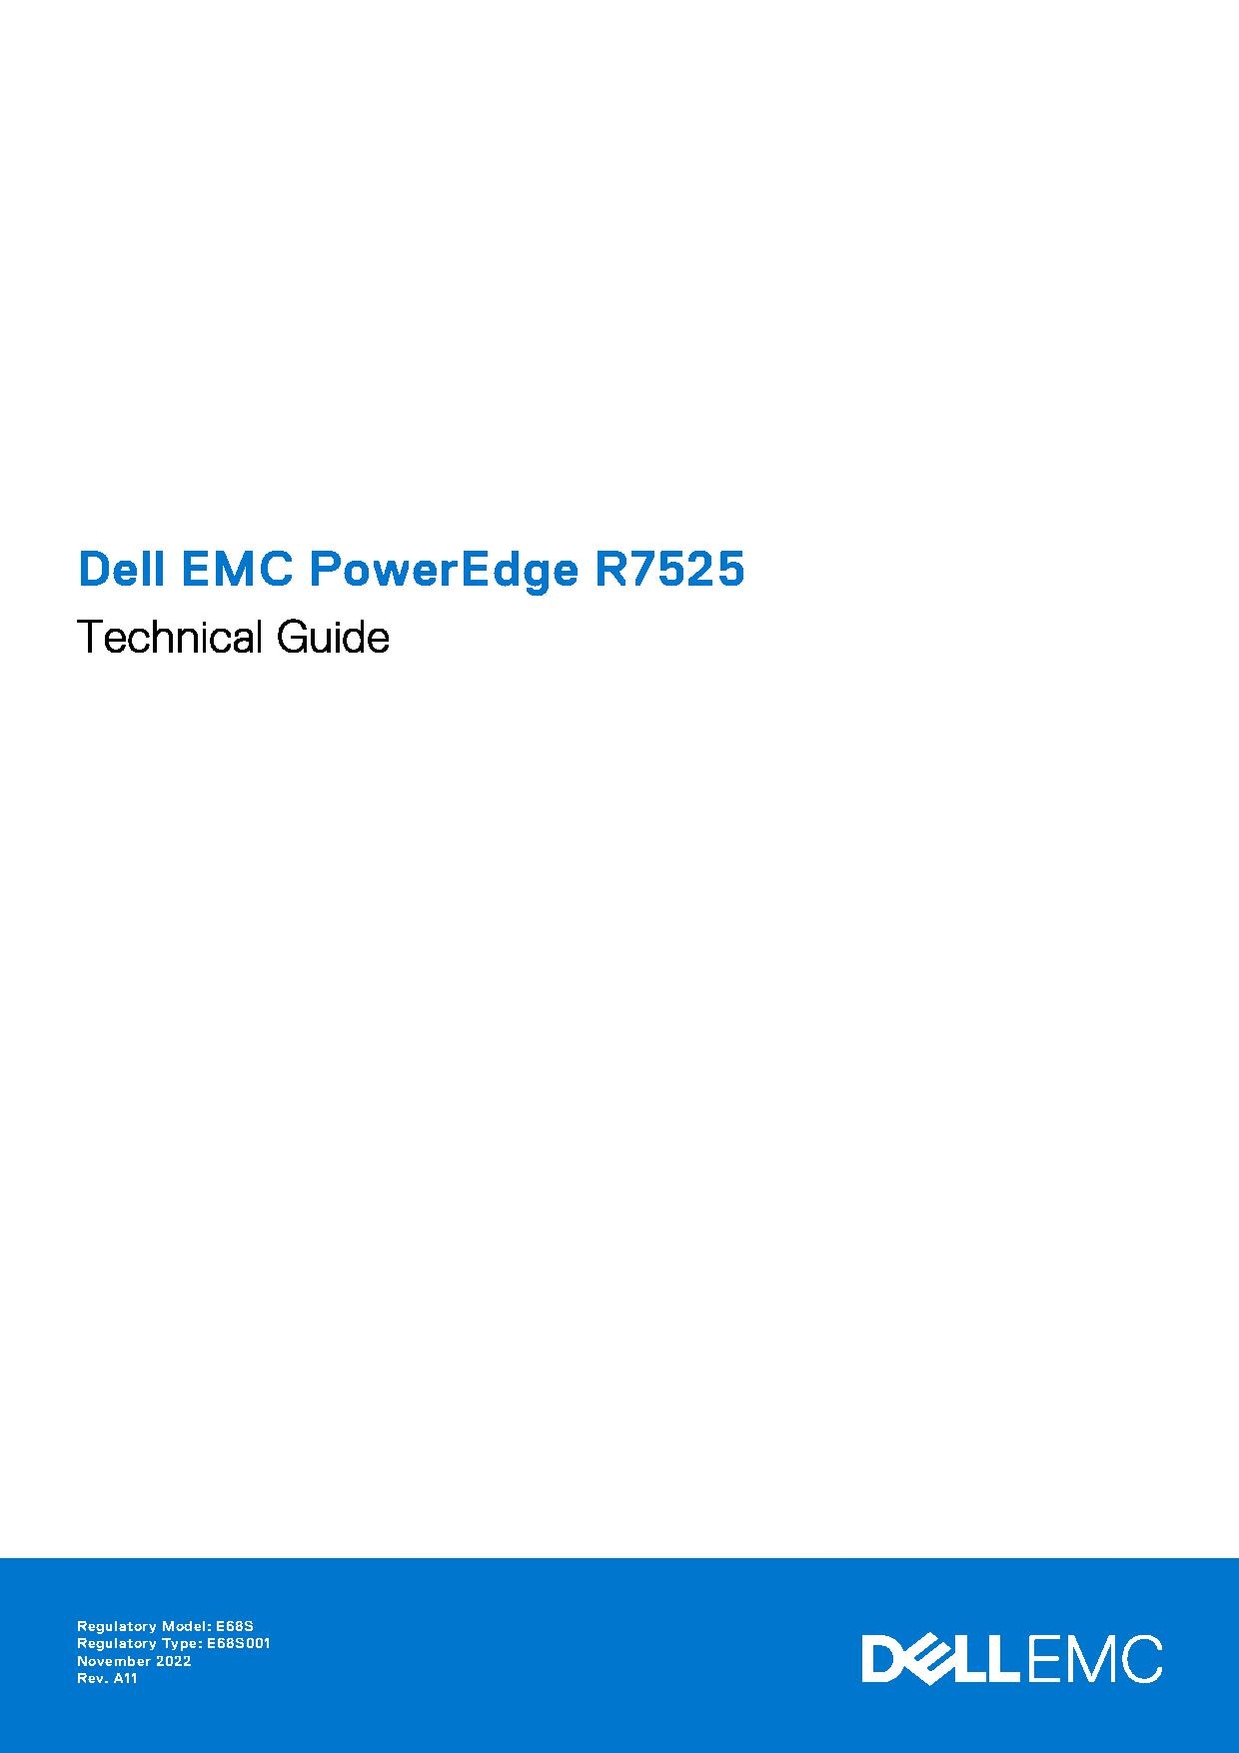 Poweredge-r7525-technical-guide